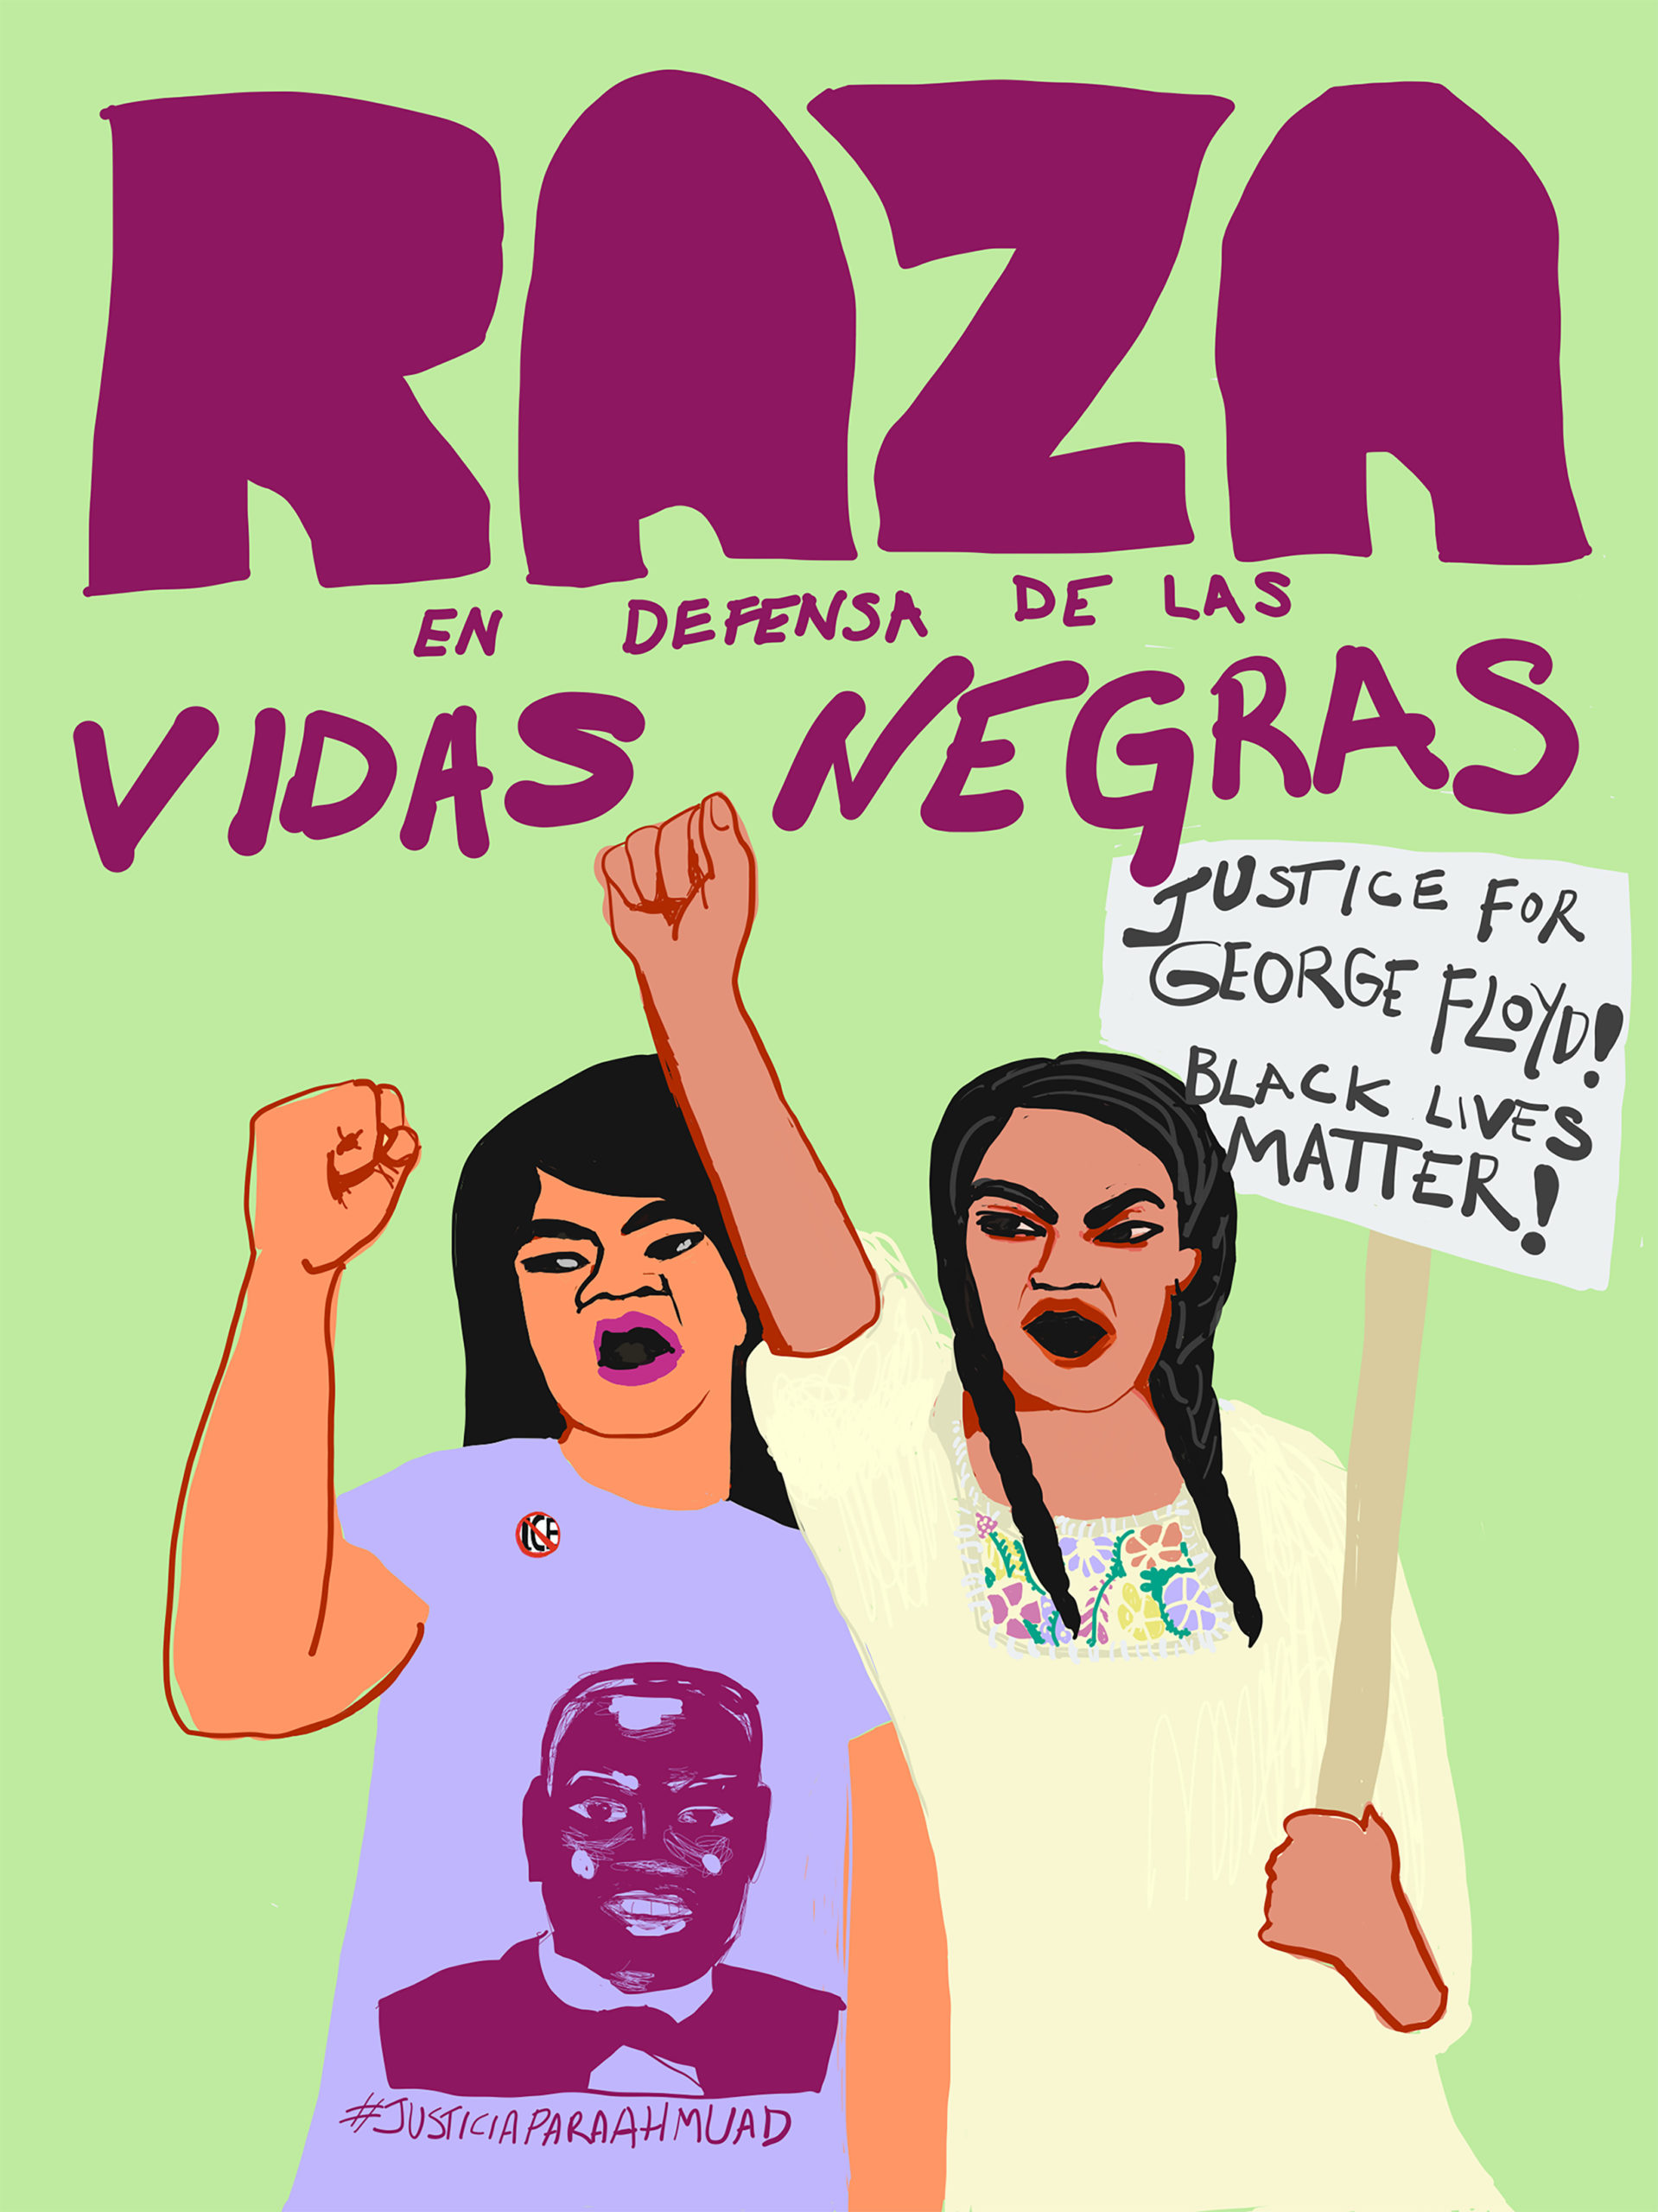 A poster featuring two activists holding a sign that reads, “Justice for George Floyd! Black Lives Matter!” and their fists raised. The image caption says, “Raza en defensa de las vidas negras”